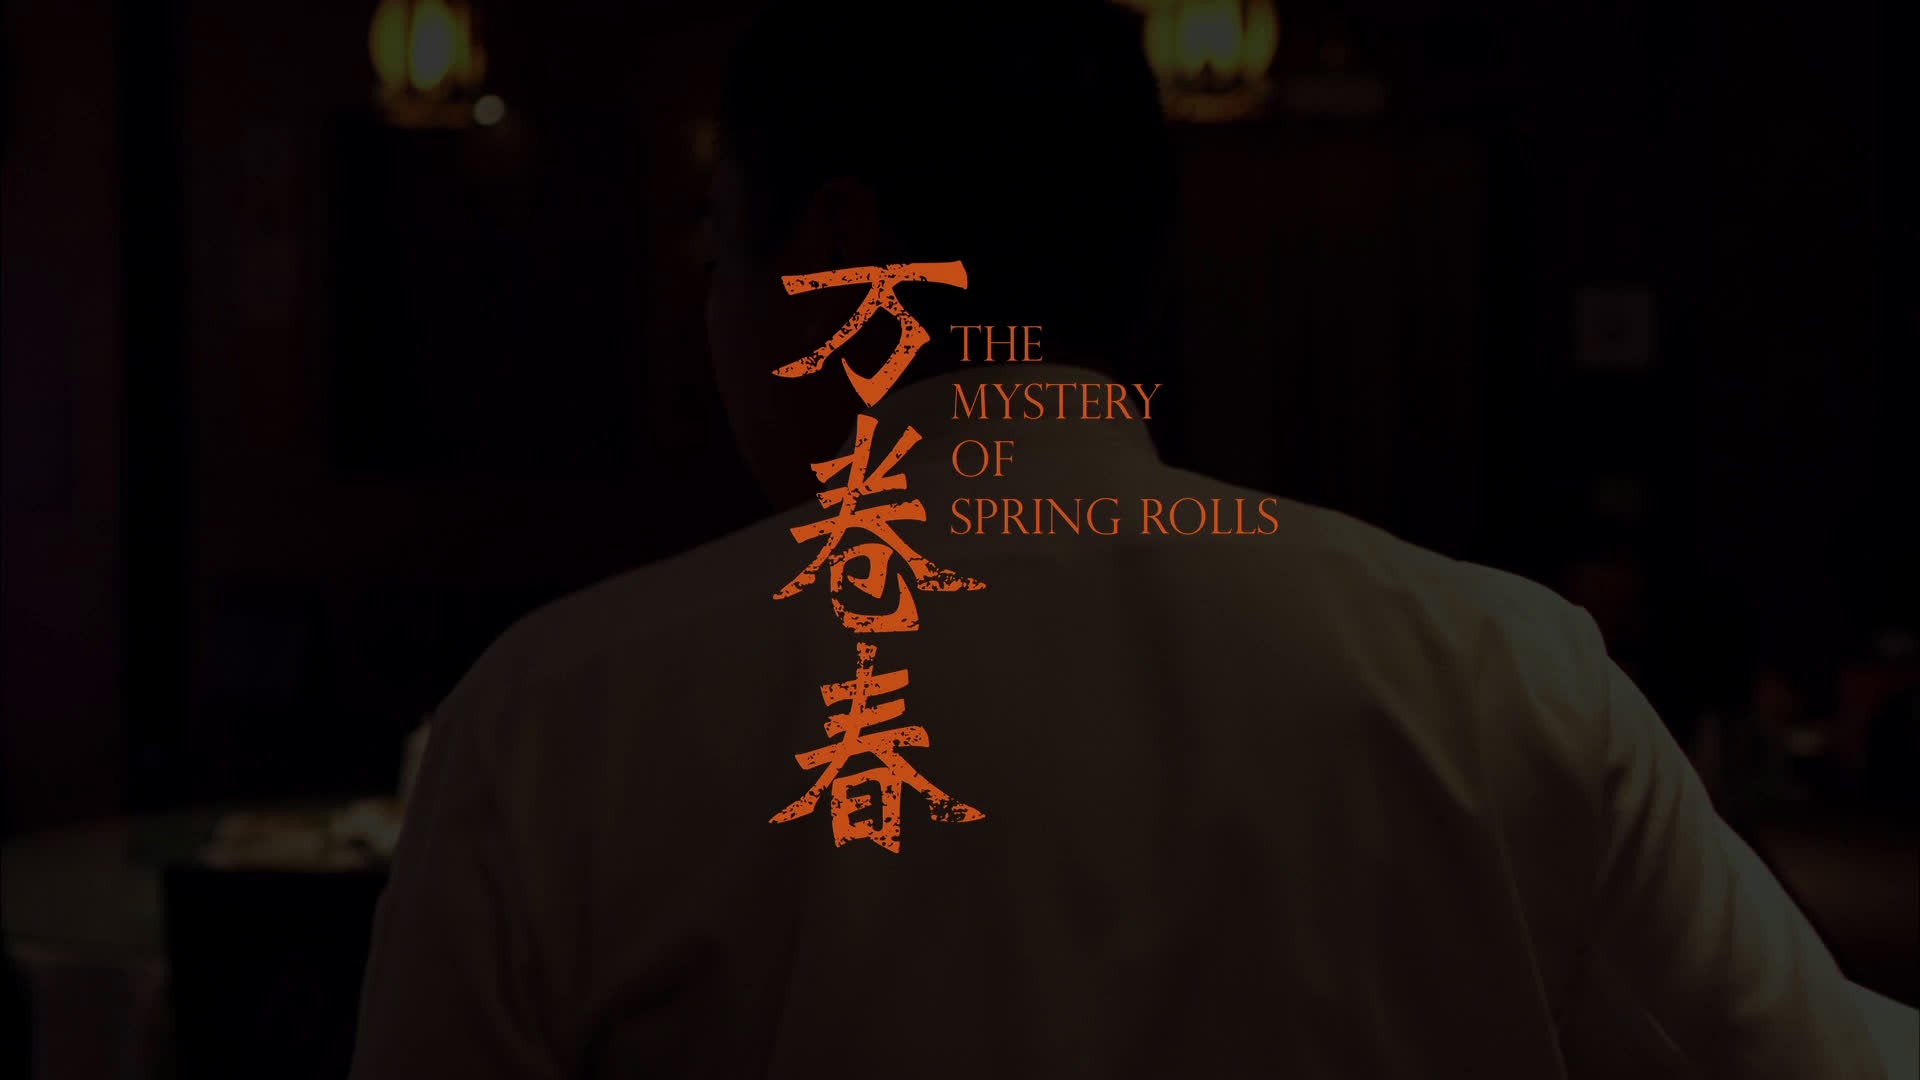 THE MYSTERY OF SPRING ROLLS